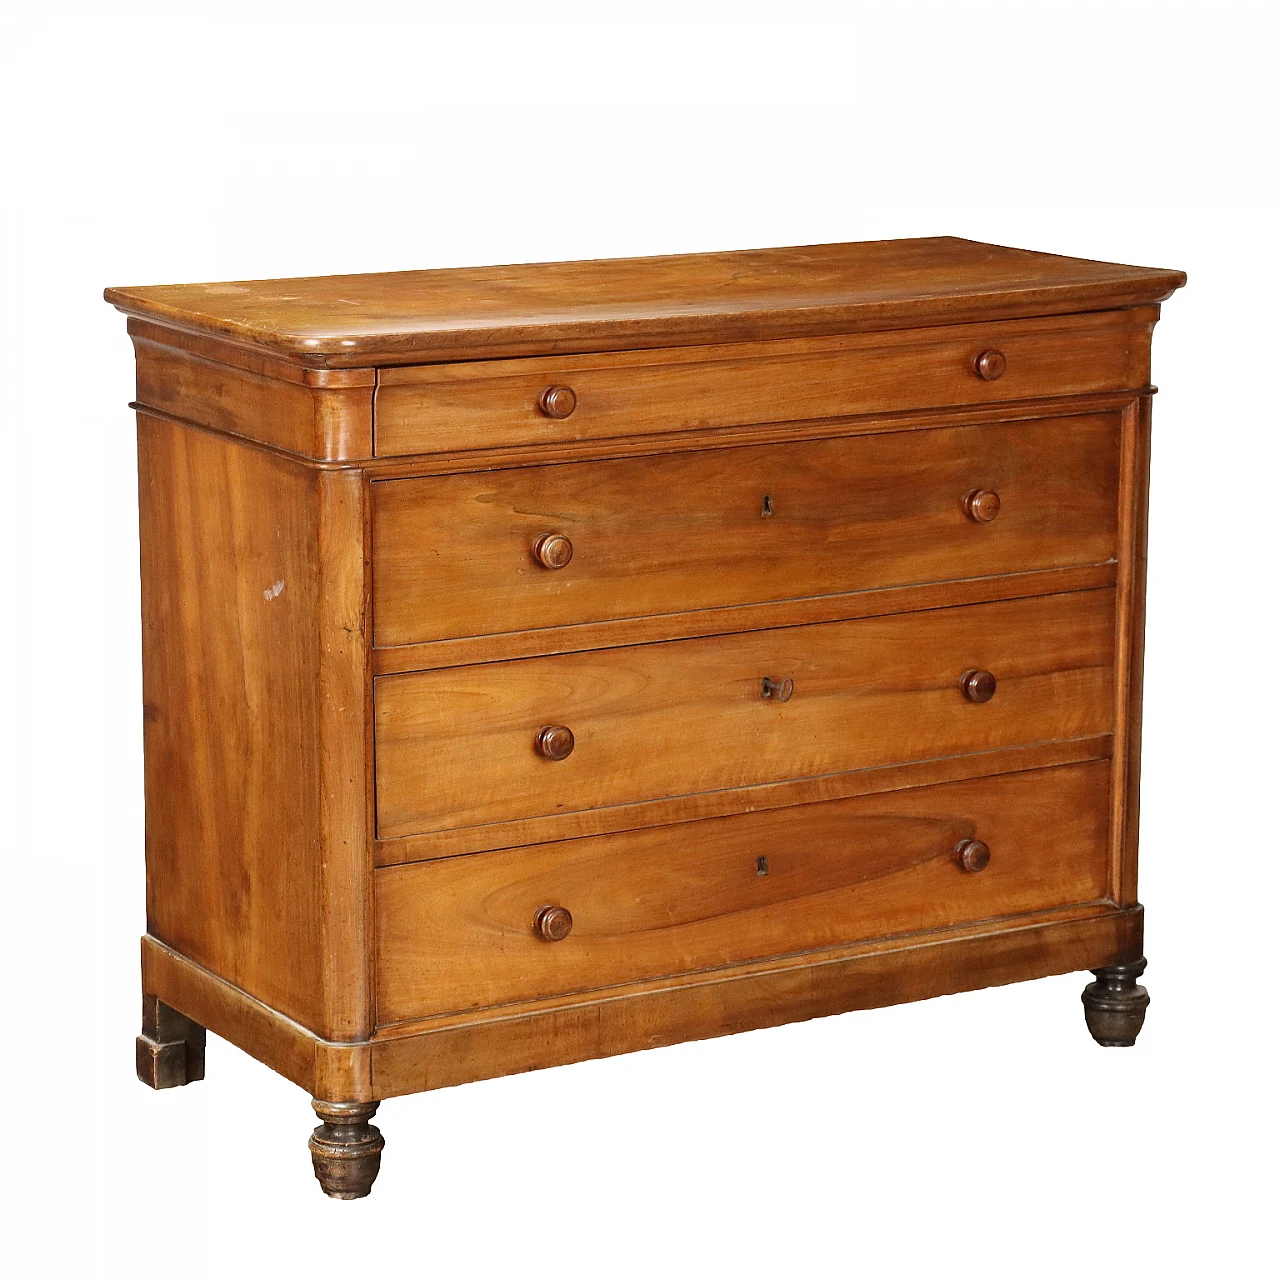 Walnut & poplar chest of drawers with turned feet, 19th century 1